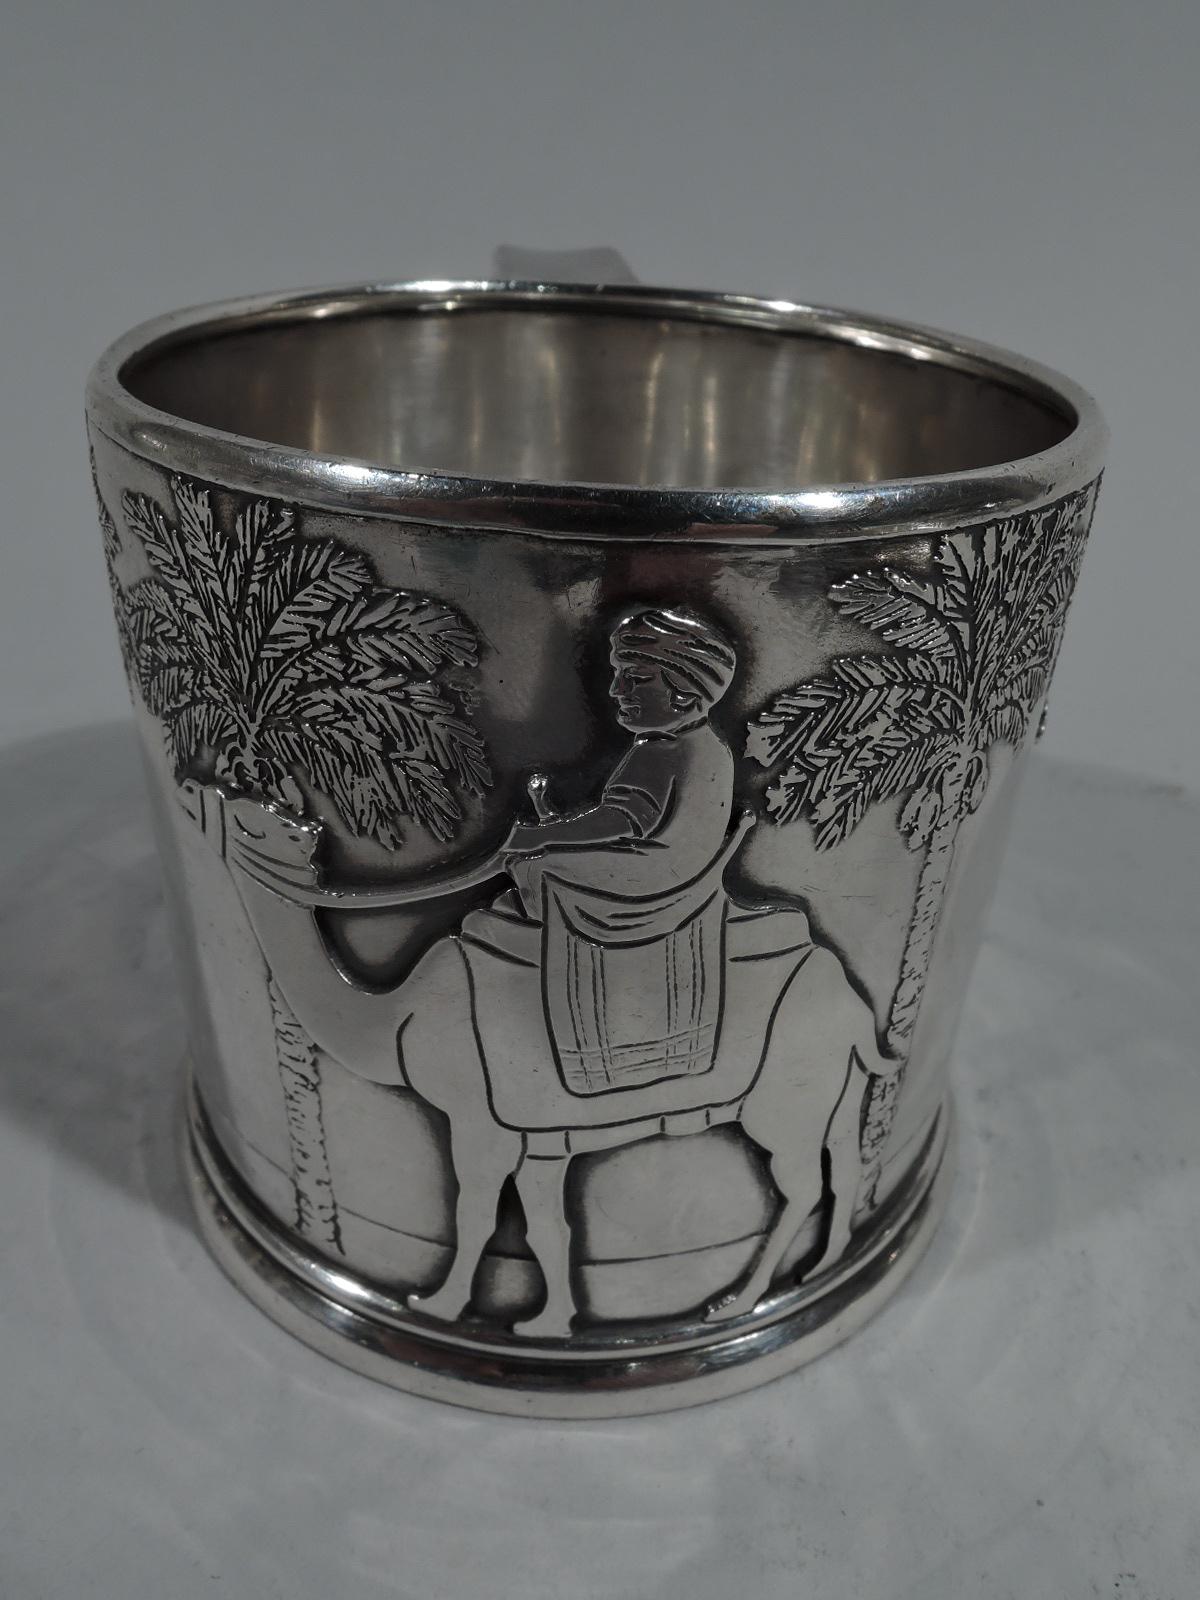 Rare sterling silver baby cup with Nativity motif. Made by Tiffany & Co. in New York, circa 1920. Drum form with bracket handle and skirted foot. Acid-etched frieze depicting three turbaned kings riding camels with palm tree colonnade in background.